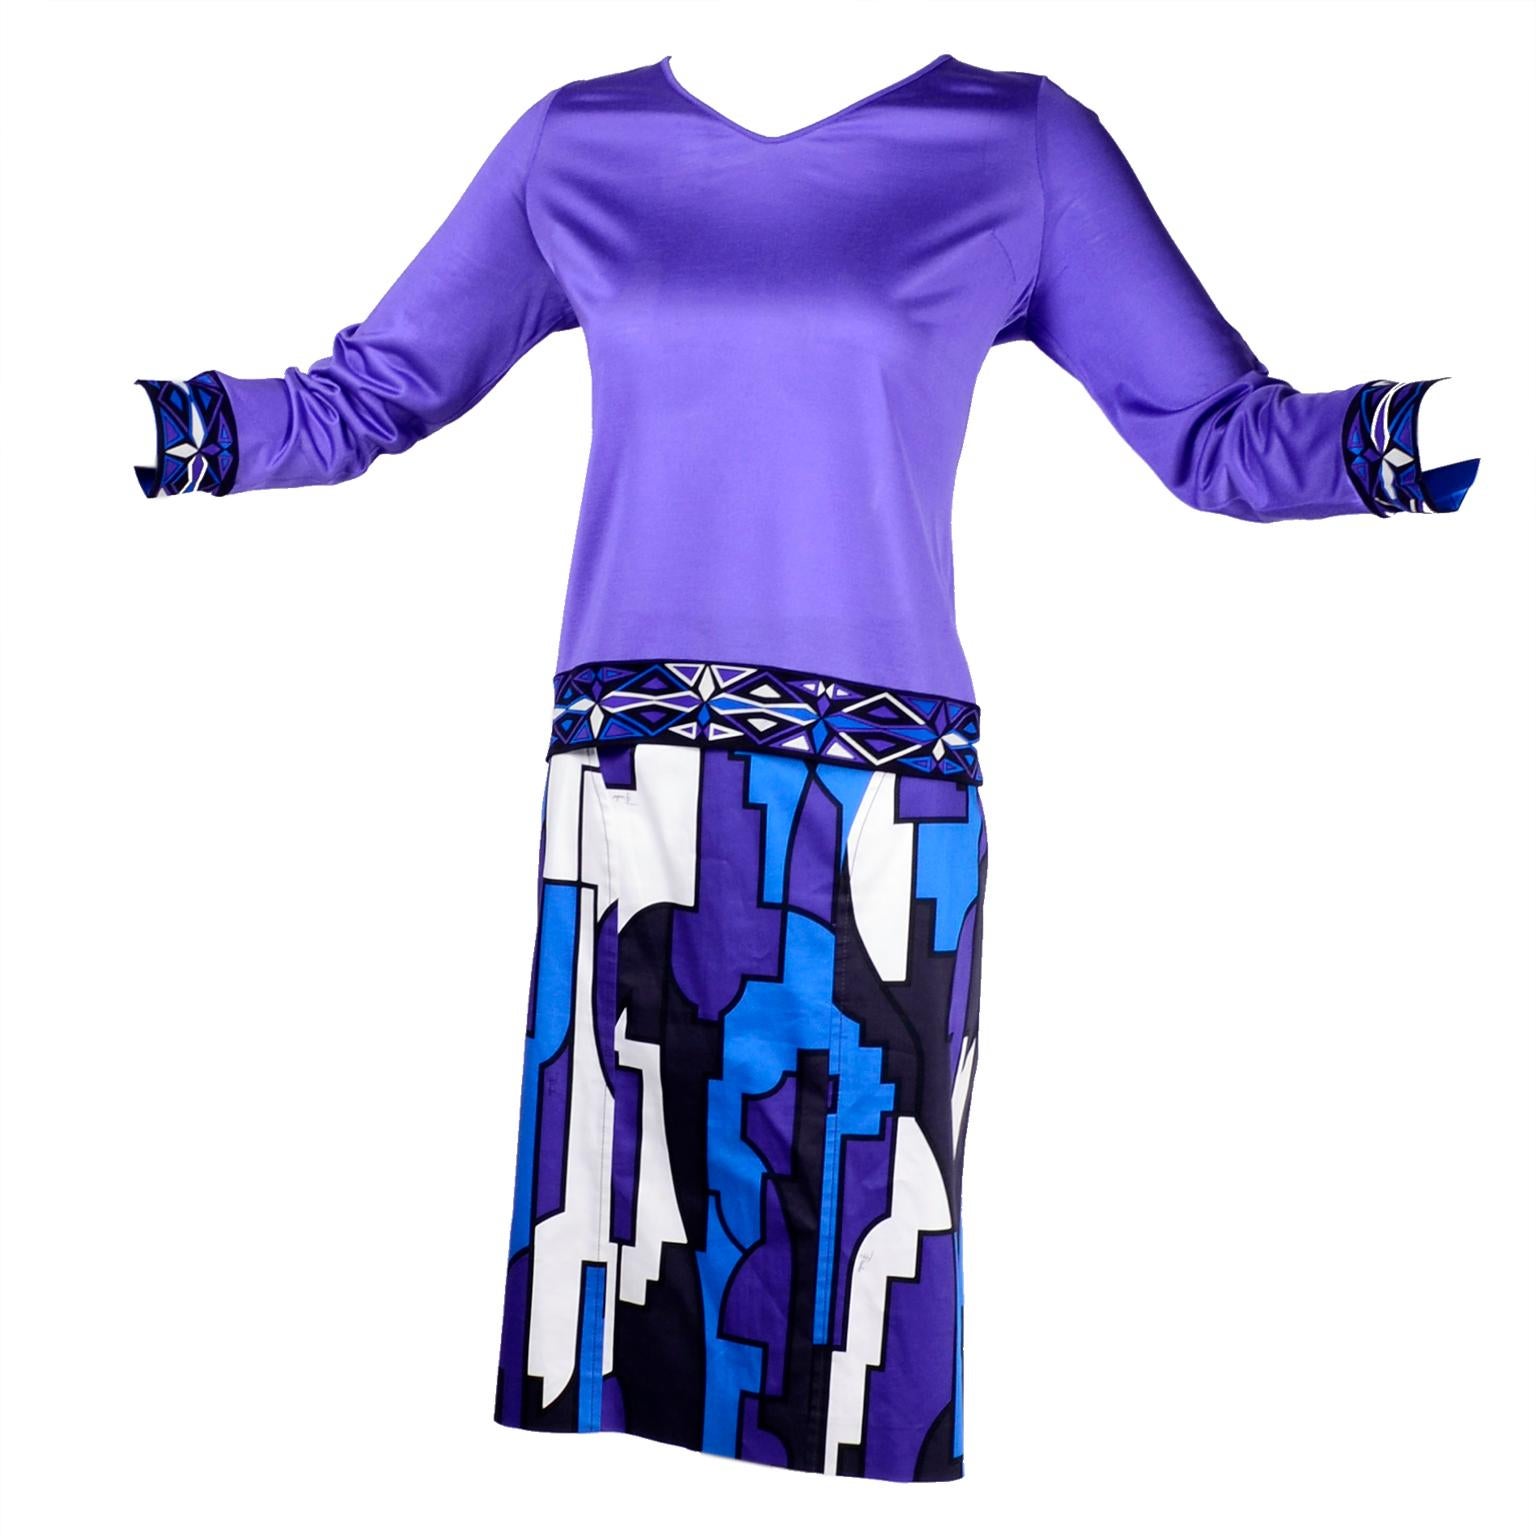 Emilio Pucci Silk Jersey 2 pc Dress Outfit W/ Top Skirt & Coordinating Scarf 